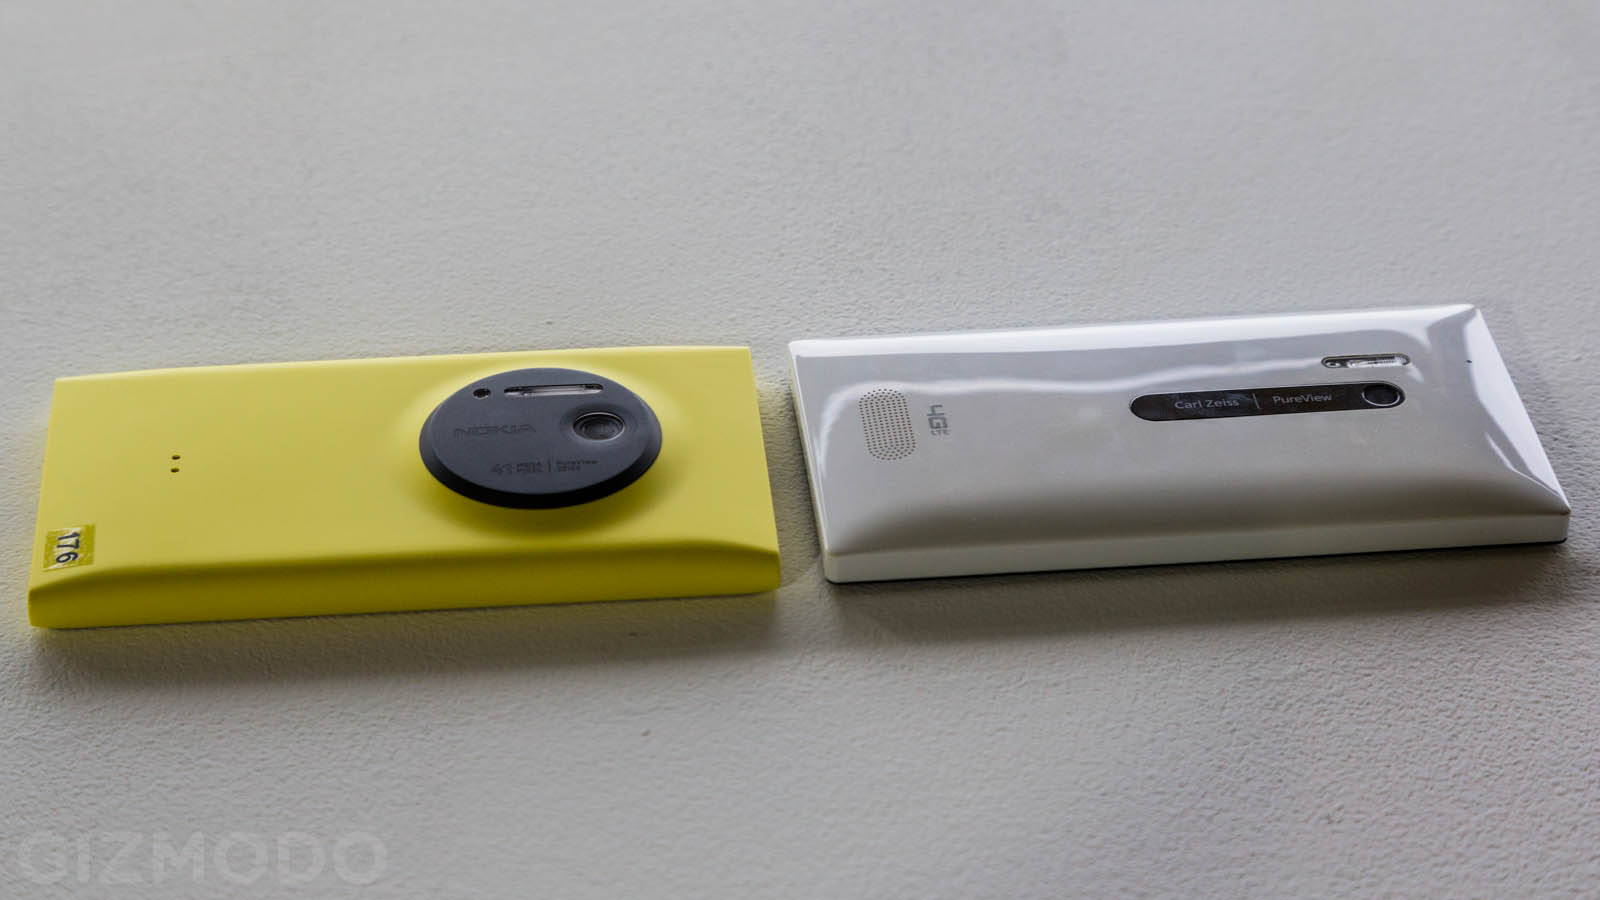 Nokia Lumia 1020 Hands-On: This Actually Might Be Amazing